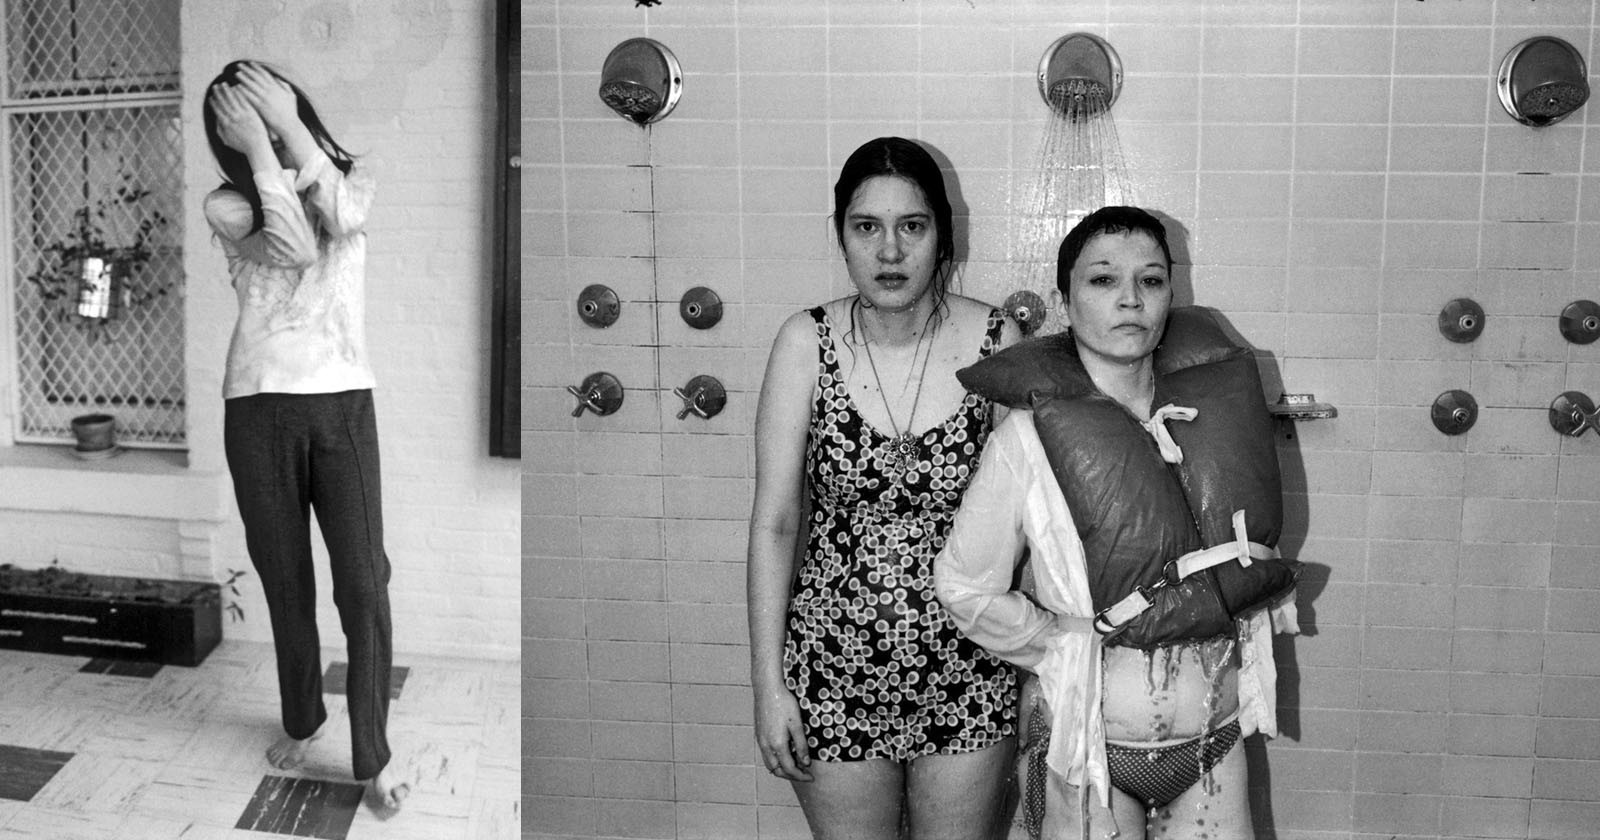 Photographers Portraits of Women in a High-Security Psychiatric Facility